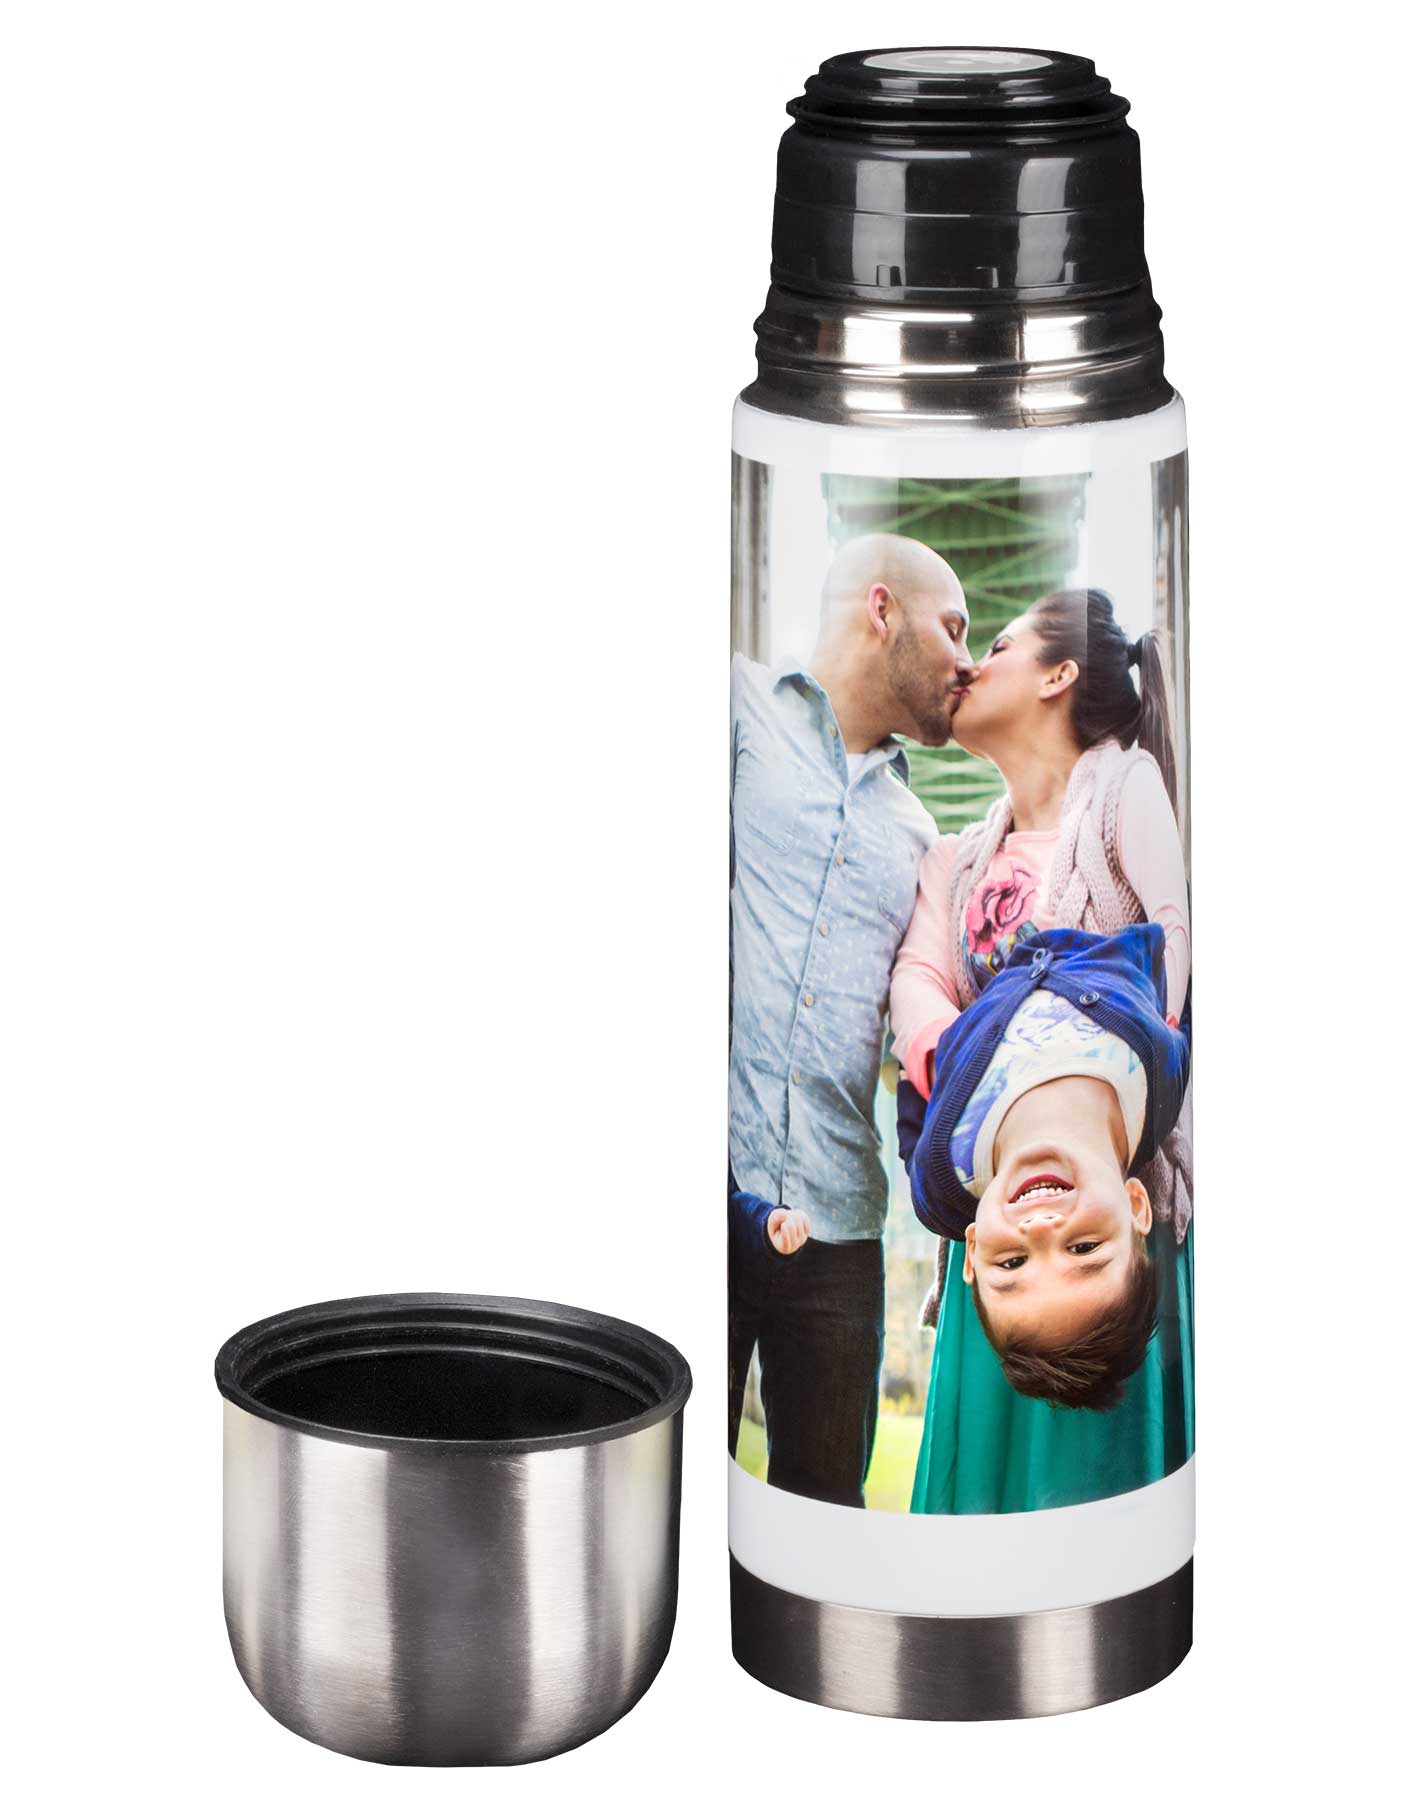 Personalized 16 oz. Stainless Steel Thermos with Custom Imprint